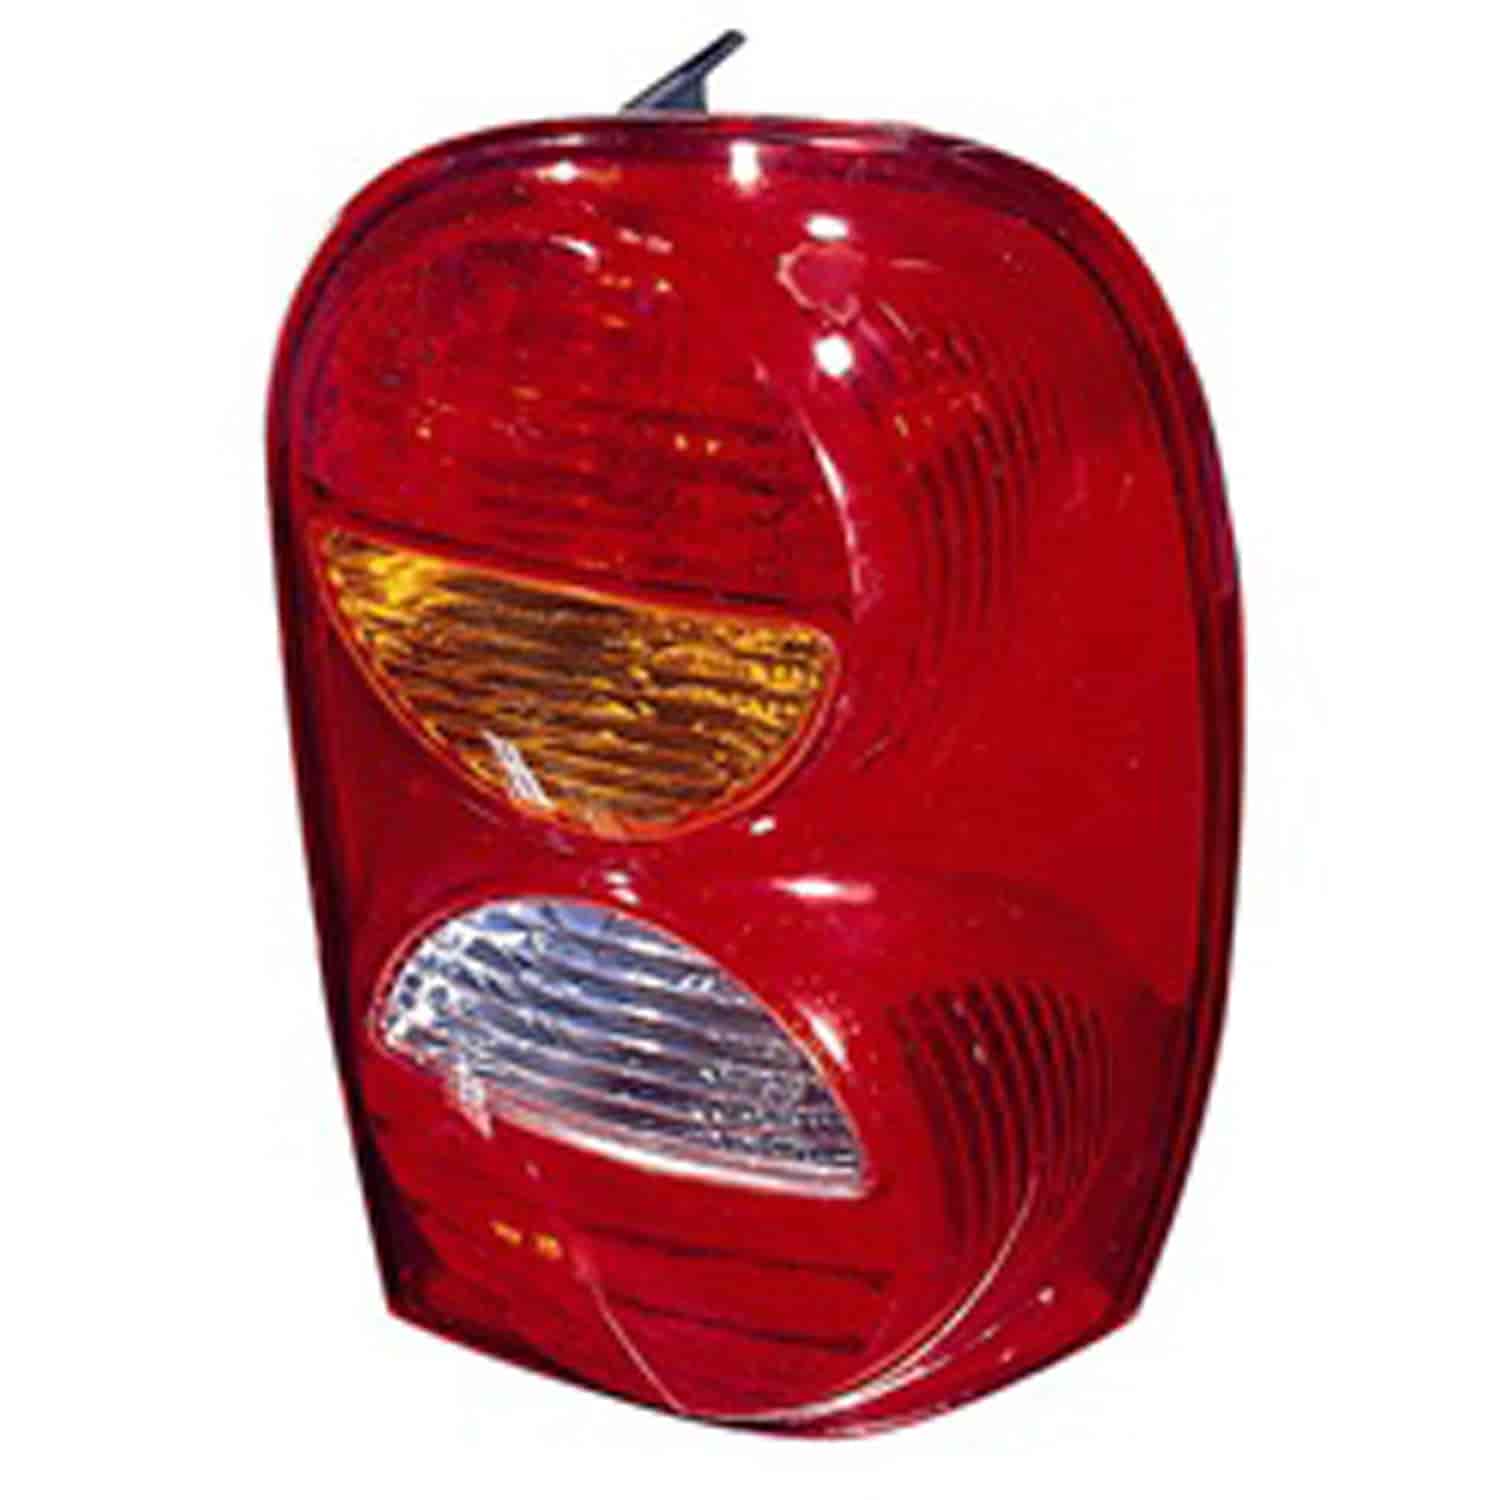 Replacement tail light assembly from Omix-ADA, Fits left side of 02-04 Jeep Liberty KJ